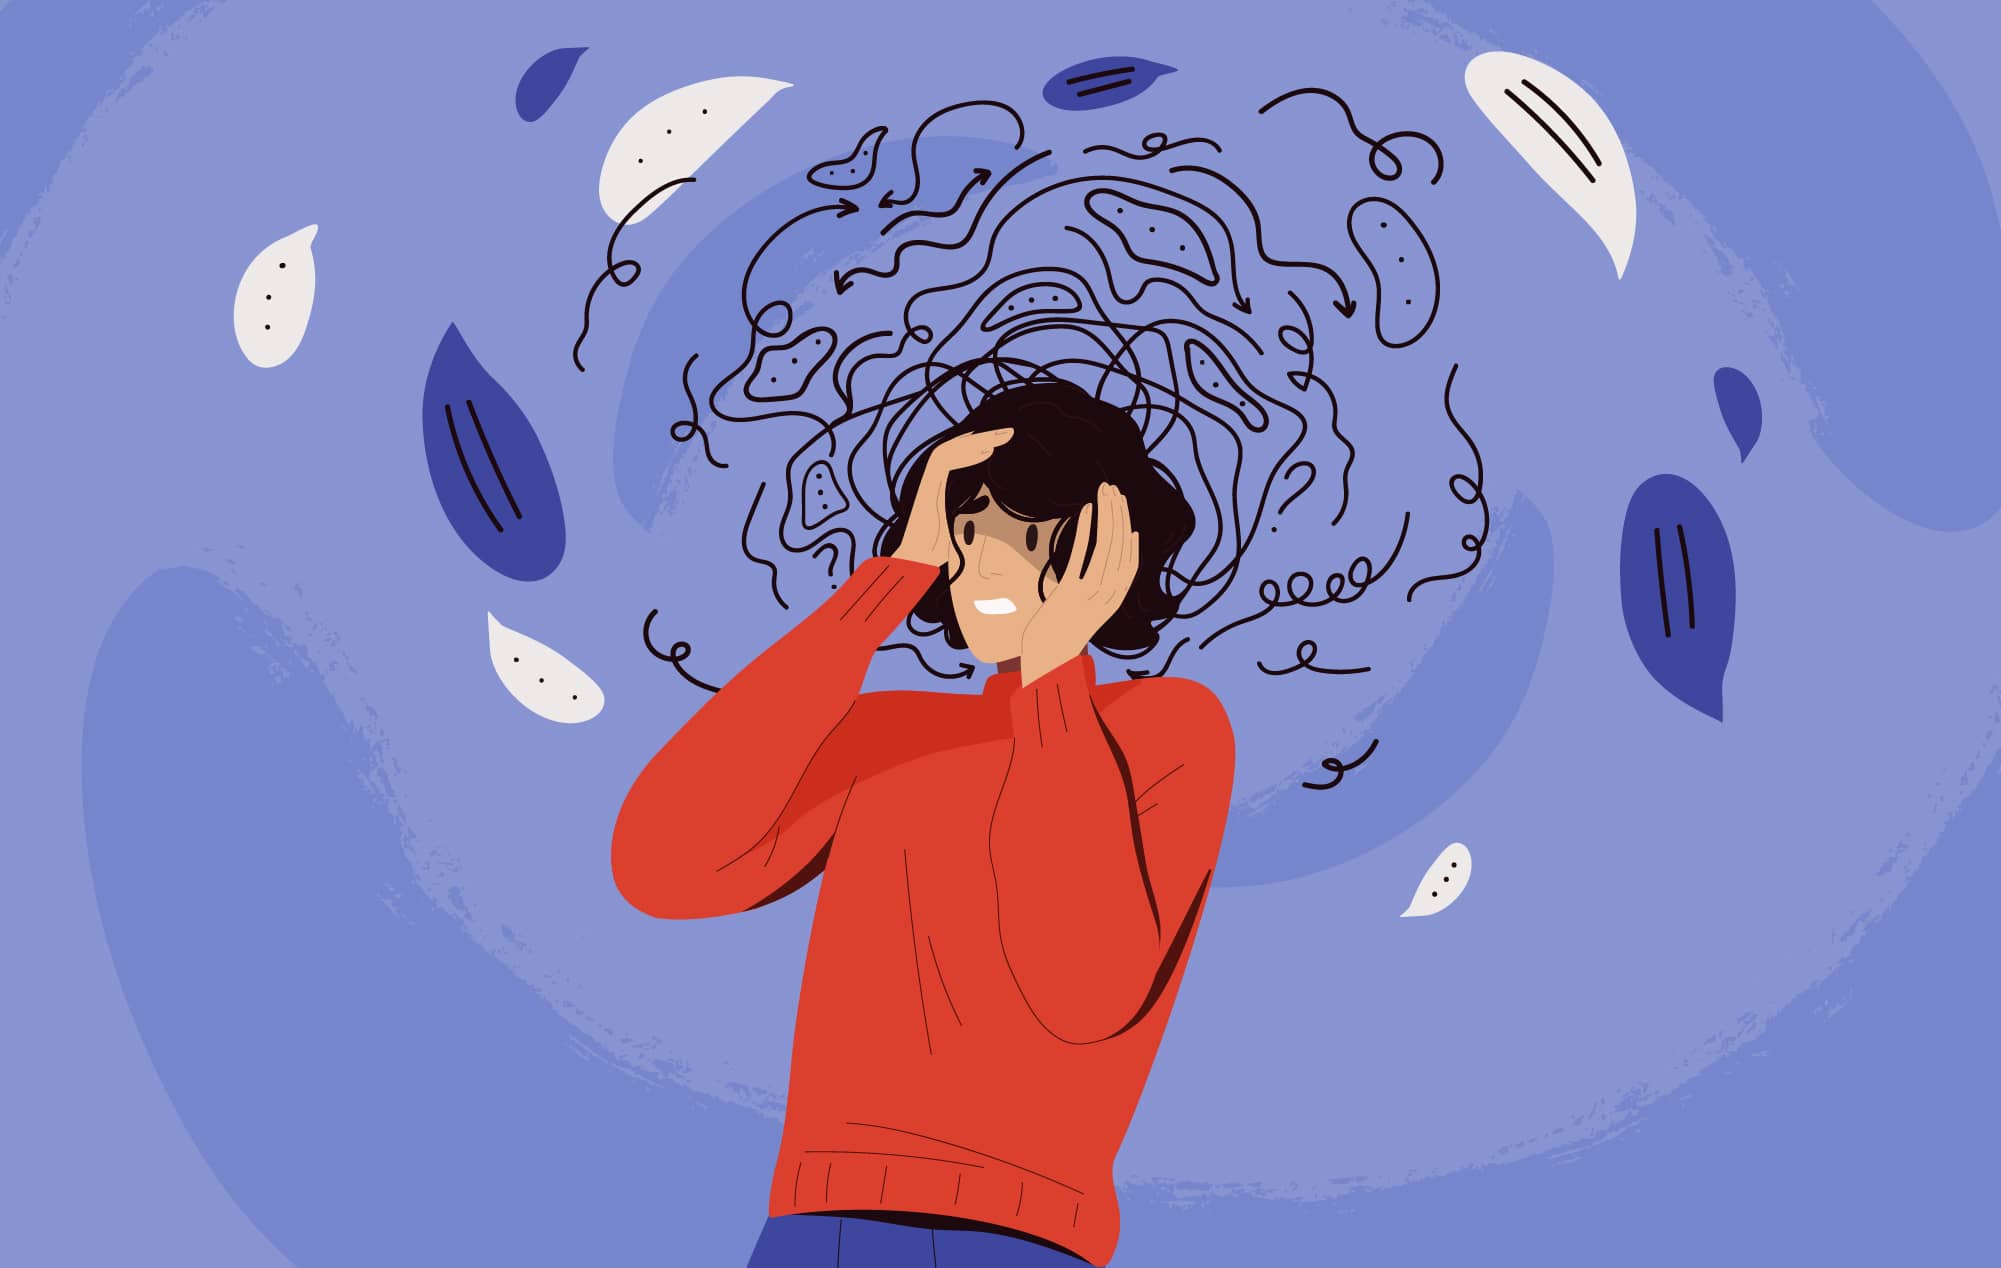 An illustration of a person holding their head in with swirly lines surrounding it; demonstrating frustration.